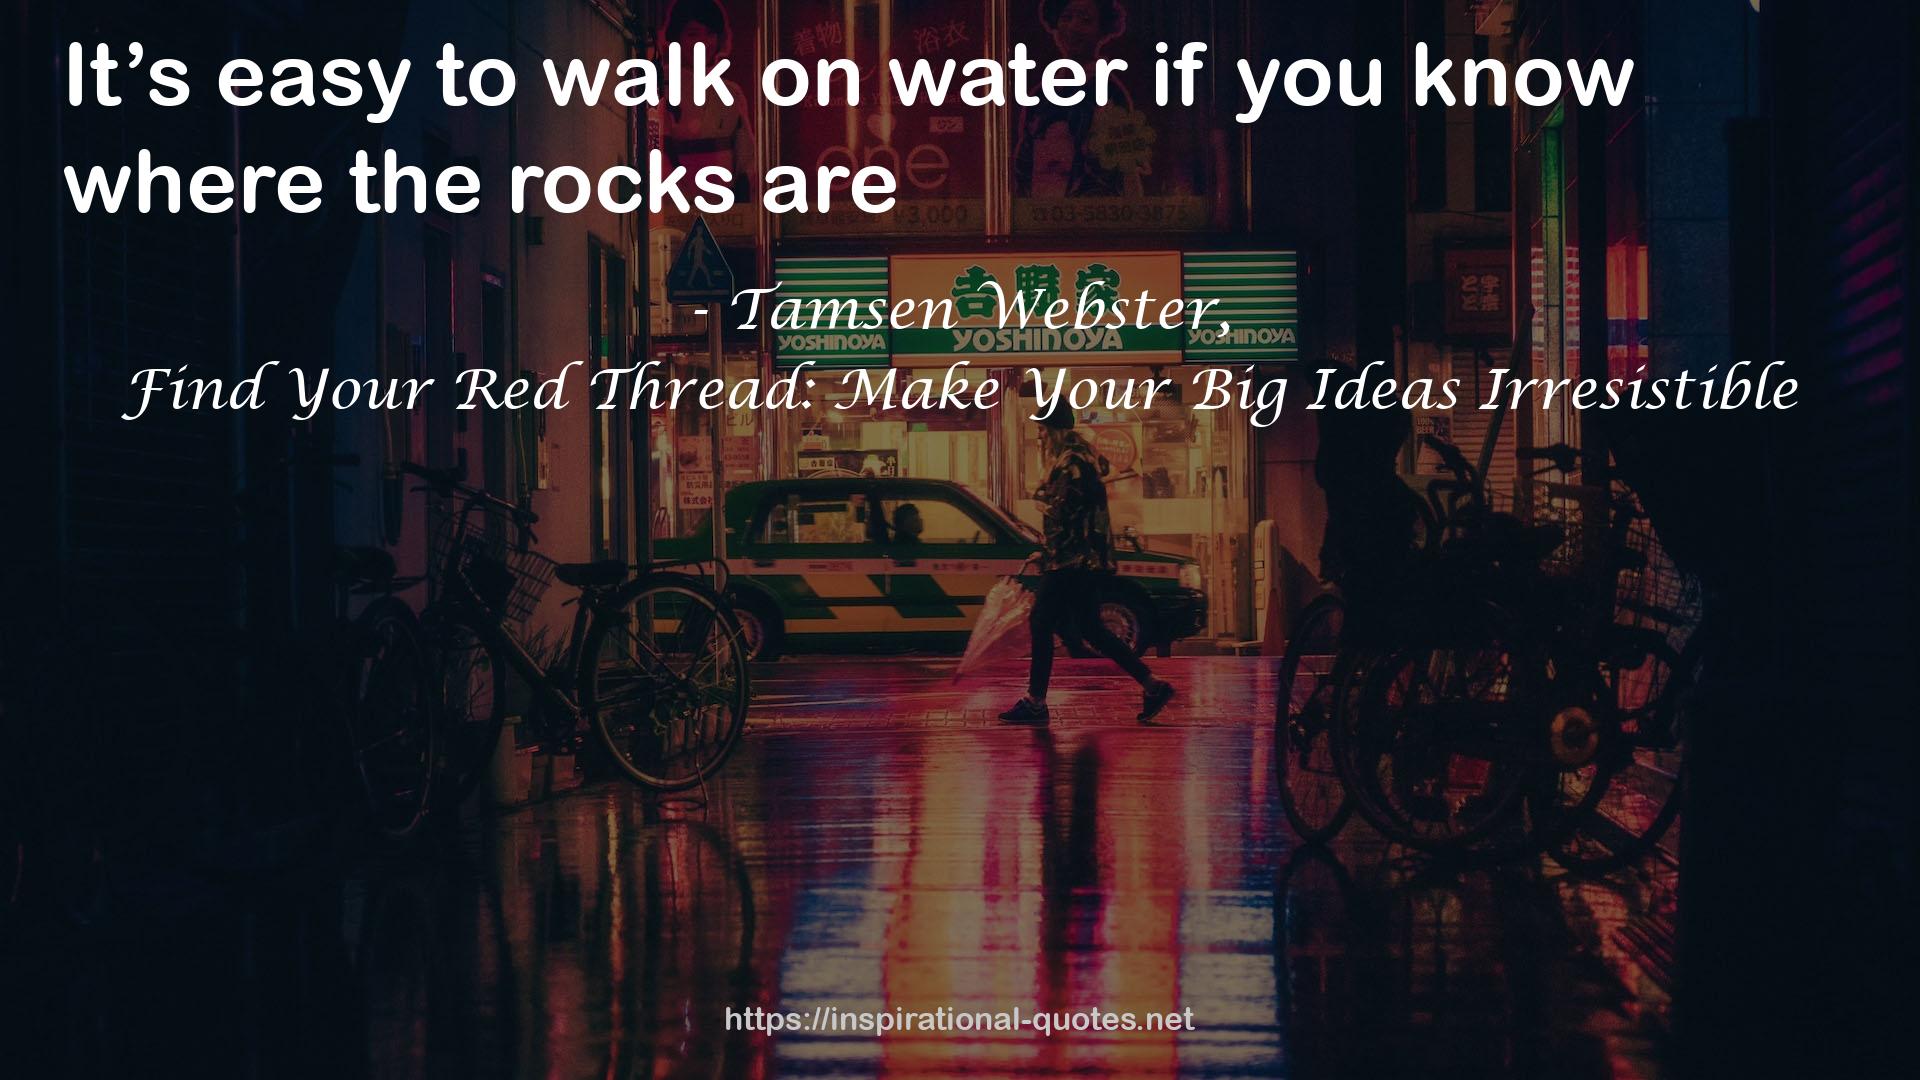 Find Your Red Thread: Make Your Big Ideas Irresistible QUOTES